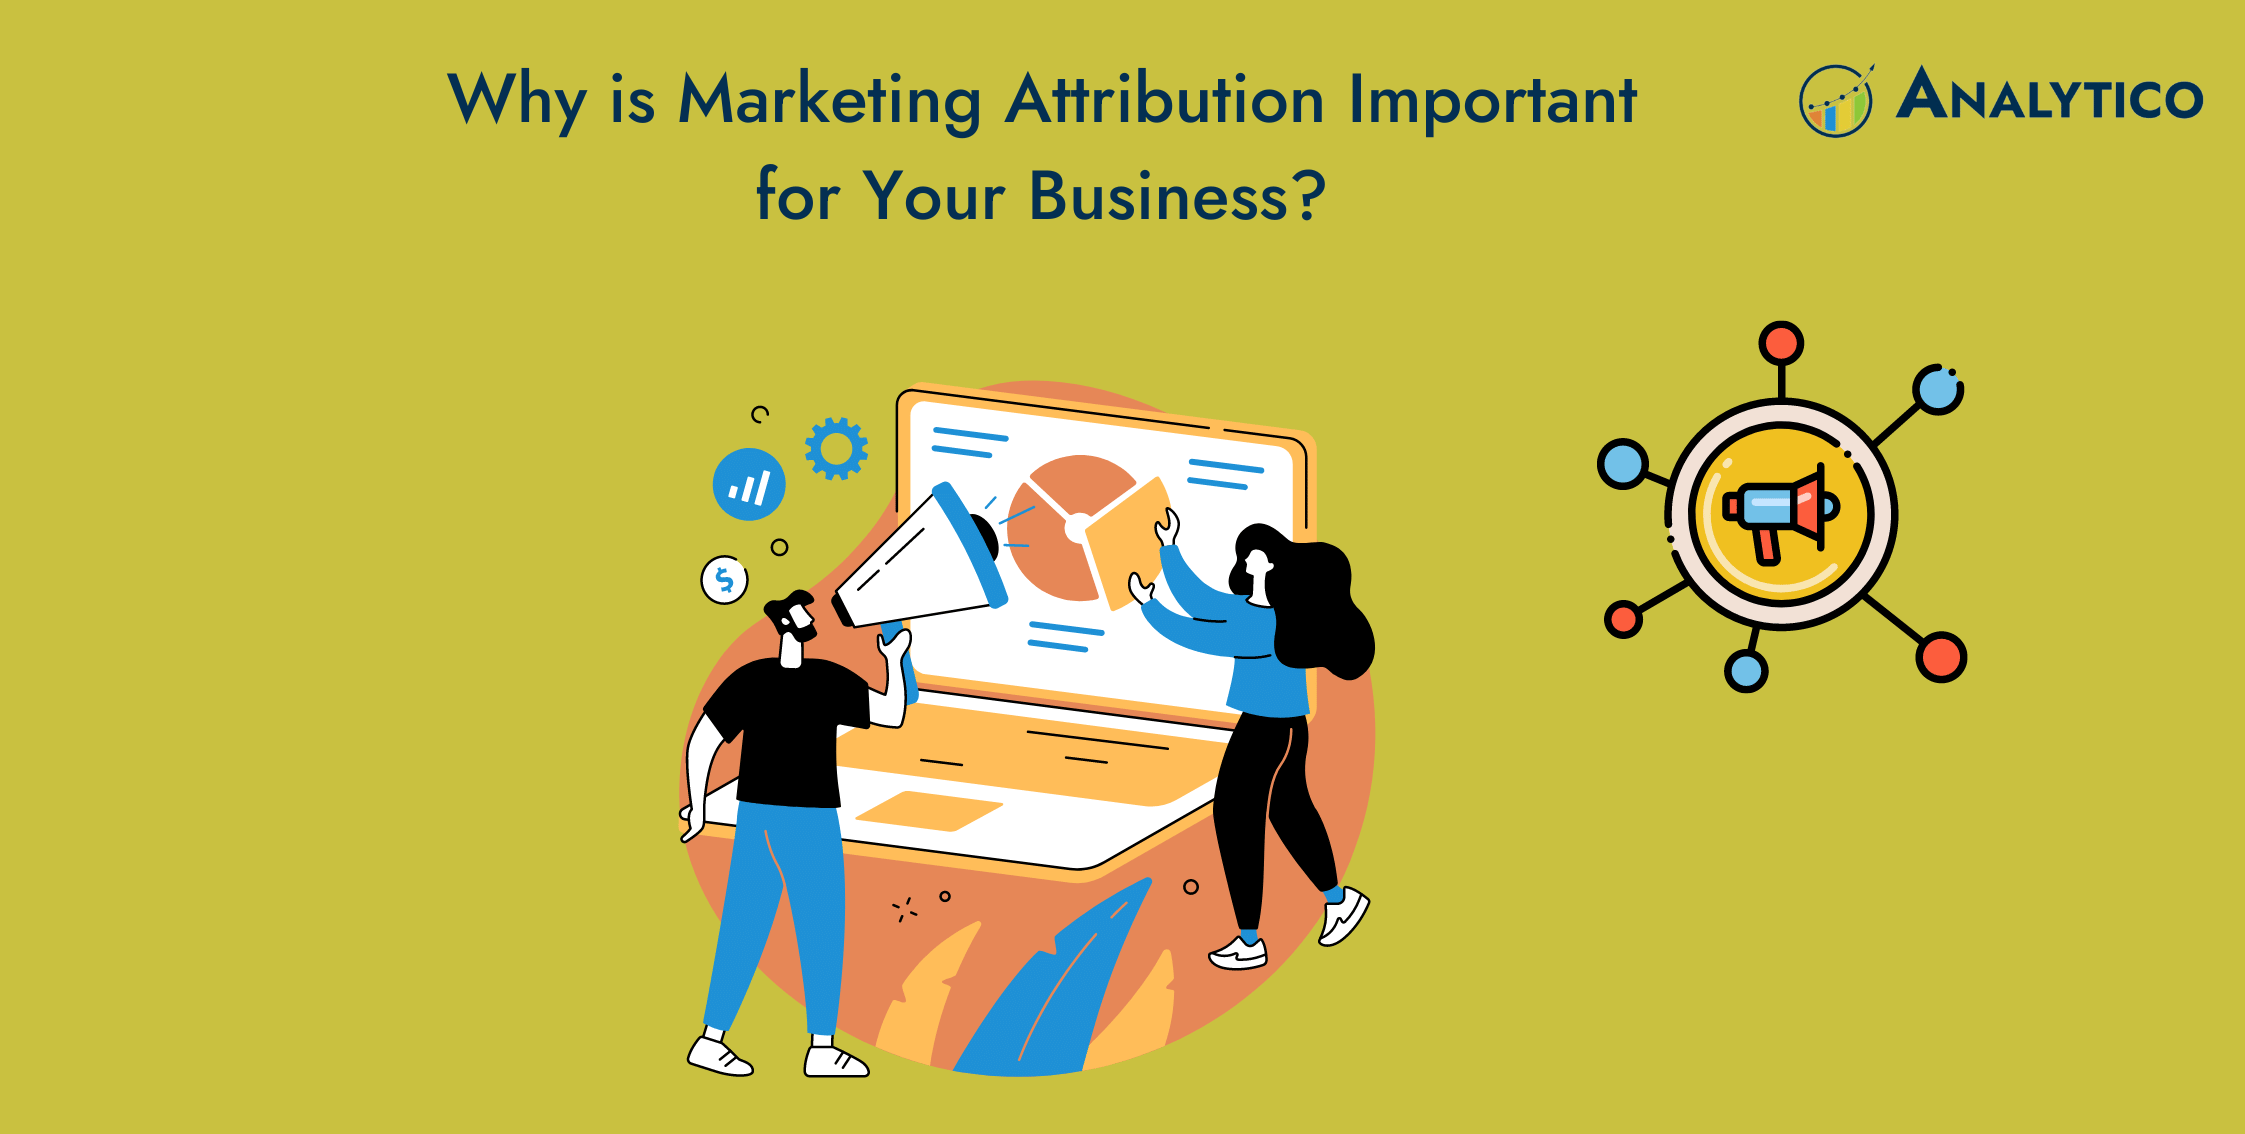 Why is Marketing Attribution Important for Your Business?